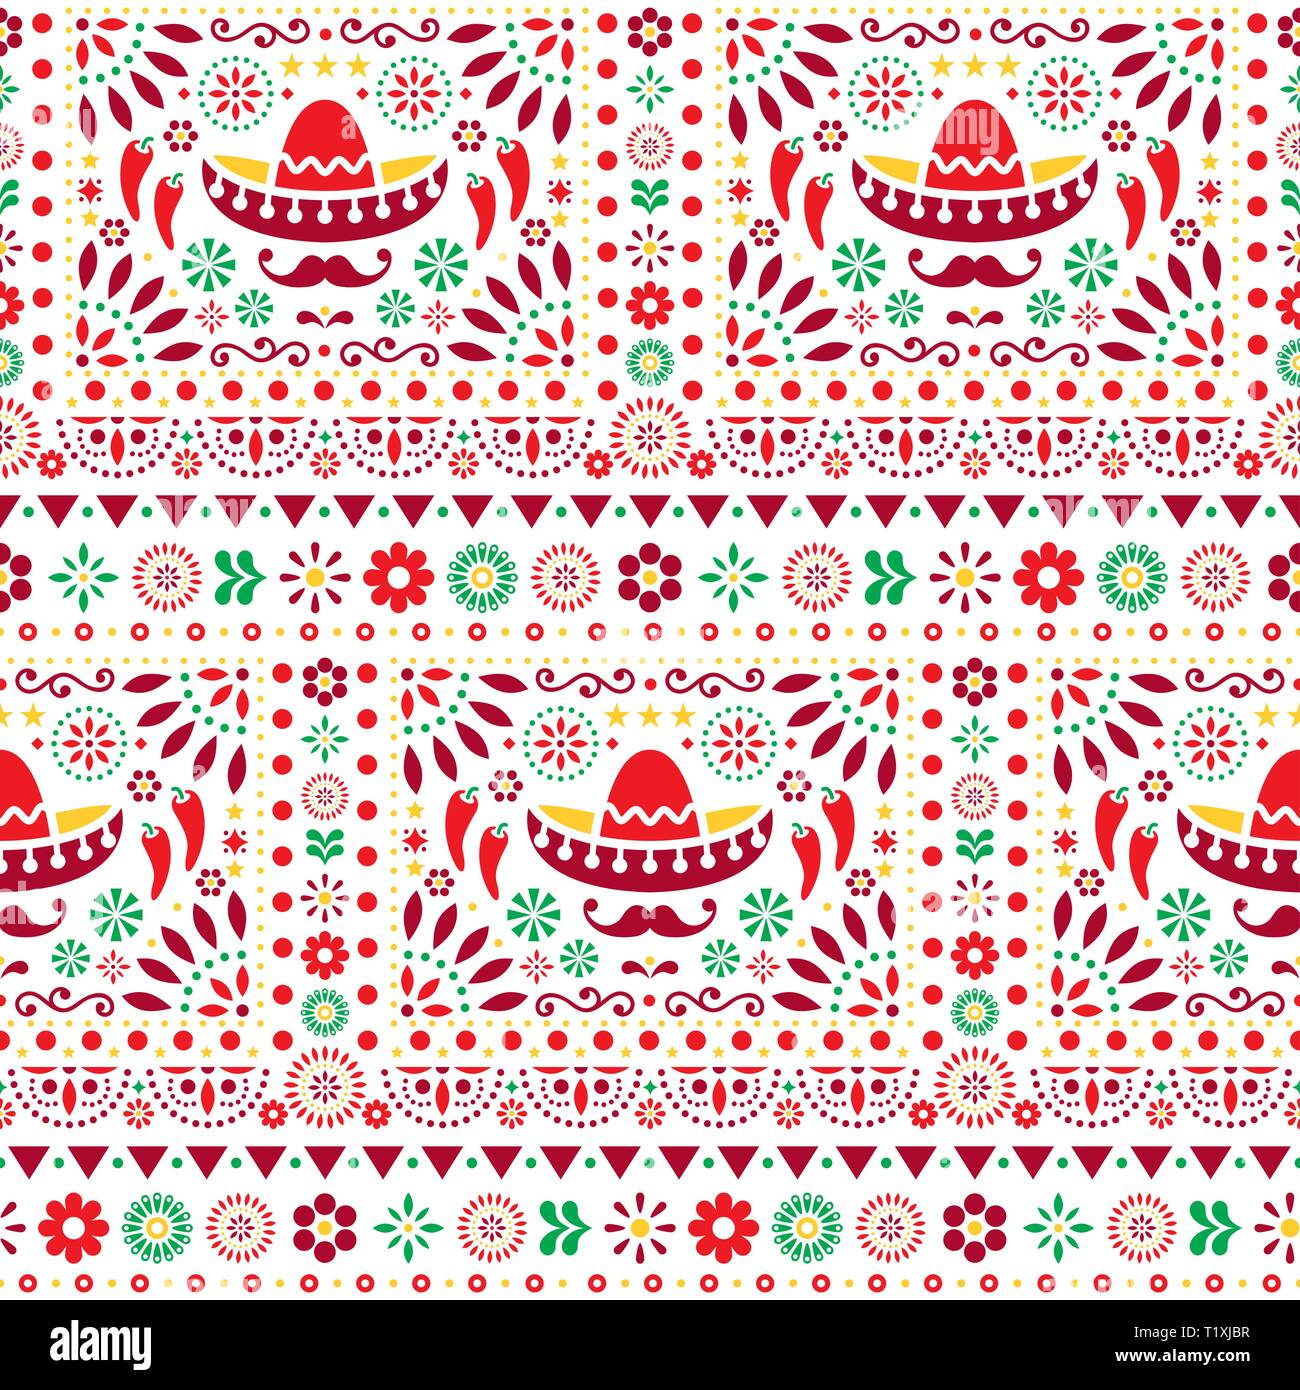 Seamless vector Mexican floral pattern with sombrero, chili peppers and flowers, happy repetitive background Stock Vector